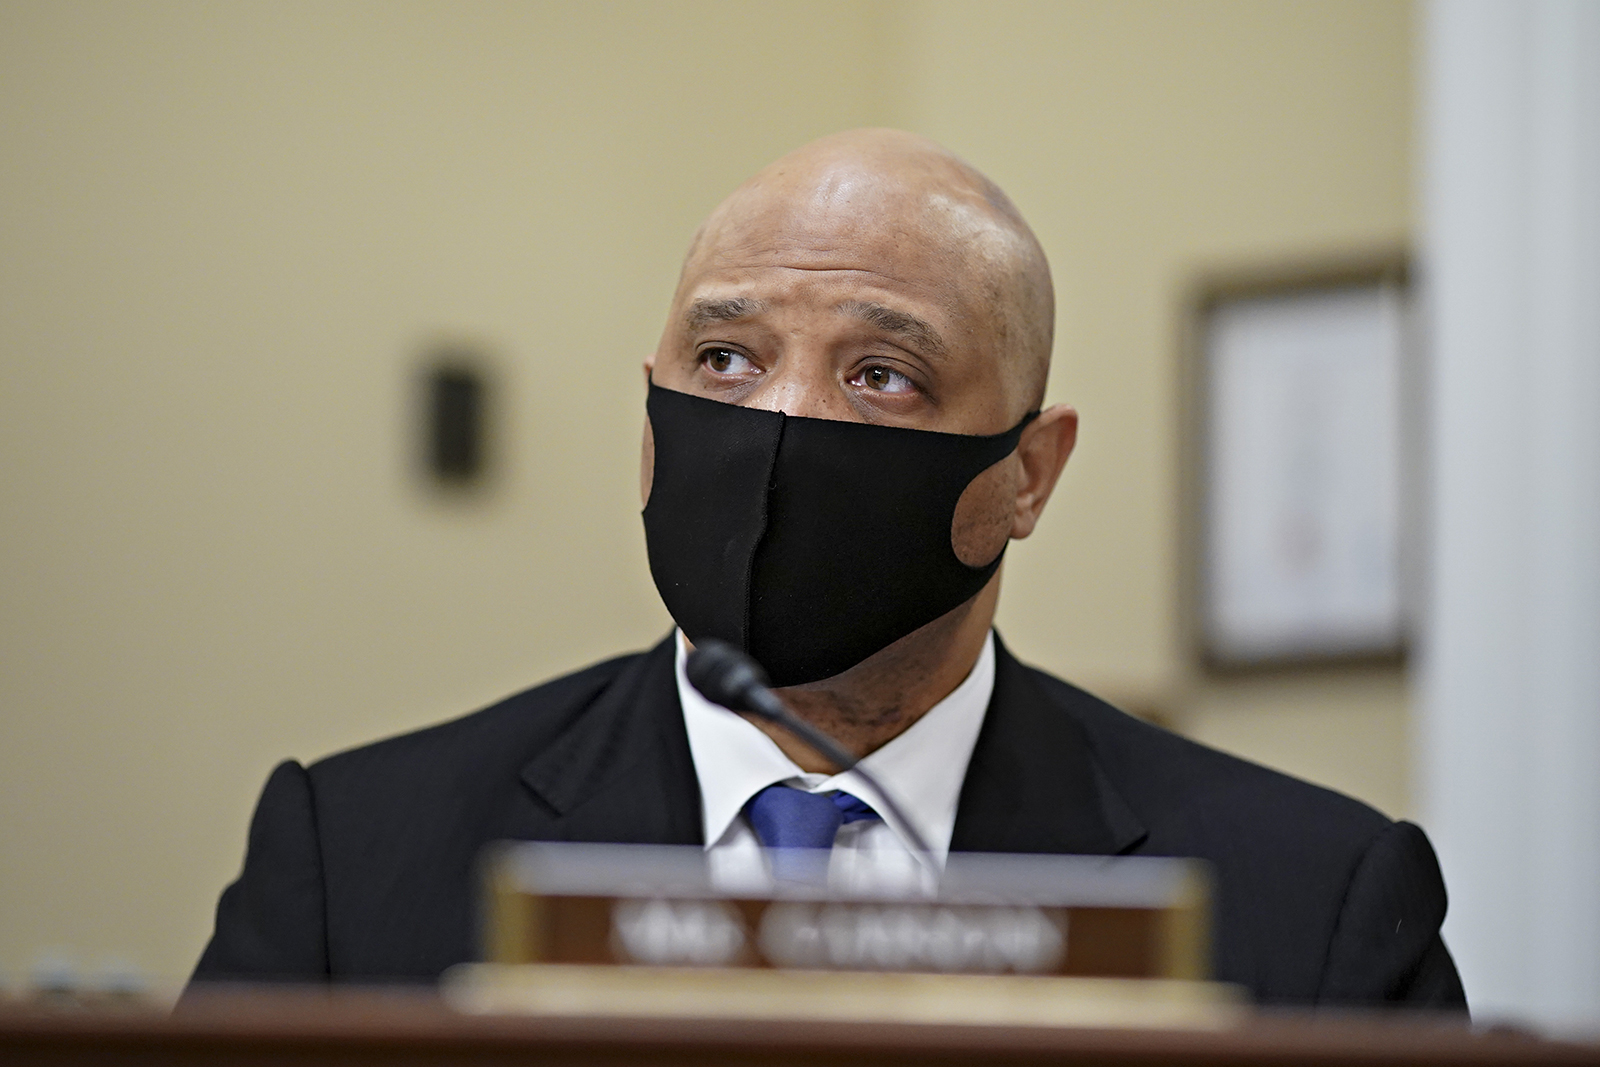 Rep. Andre Carson wears a protective mask during a House Intelligence Committee hearing in Washington, DC, on April 15.